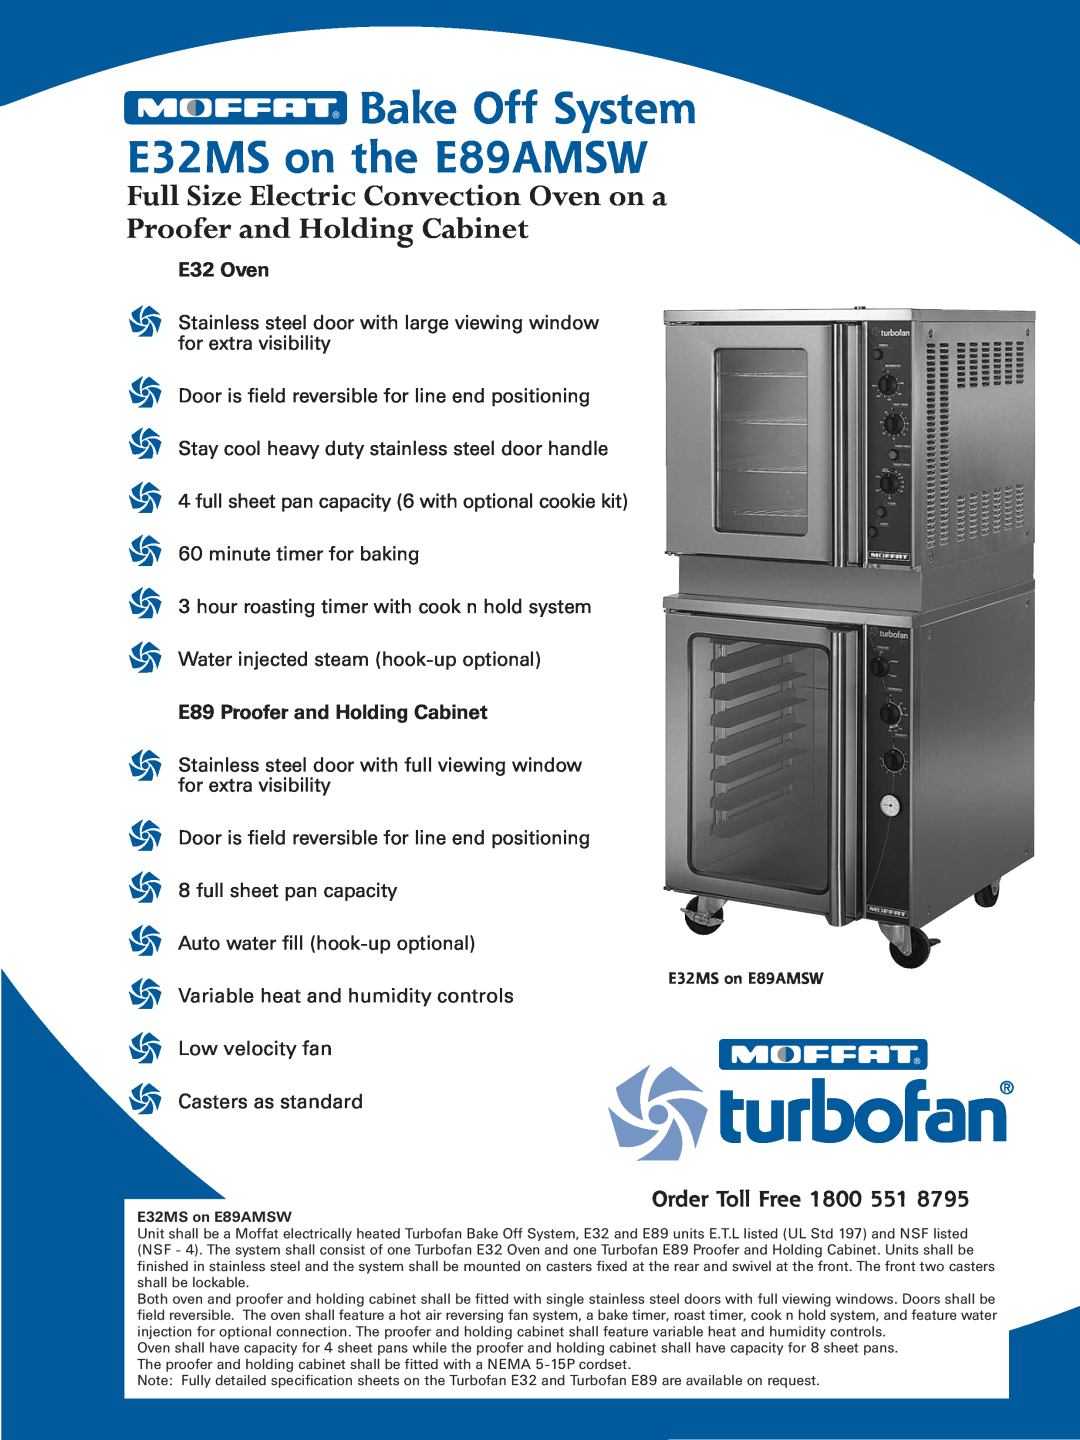 Moffat E89AMSW specifications Full Size Electric Convection Oven on a Proofer and Holding Cabinet, Order Toll Free 